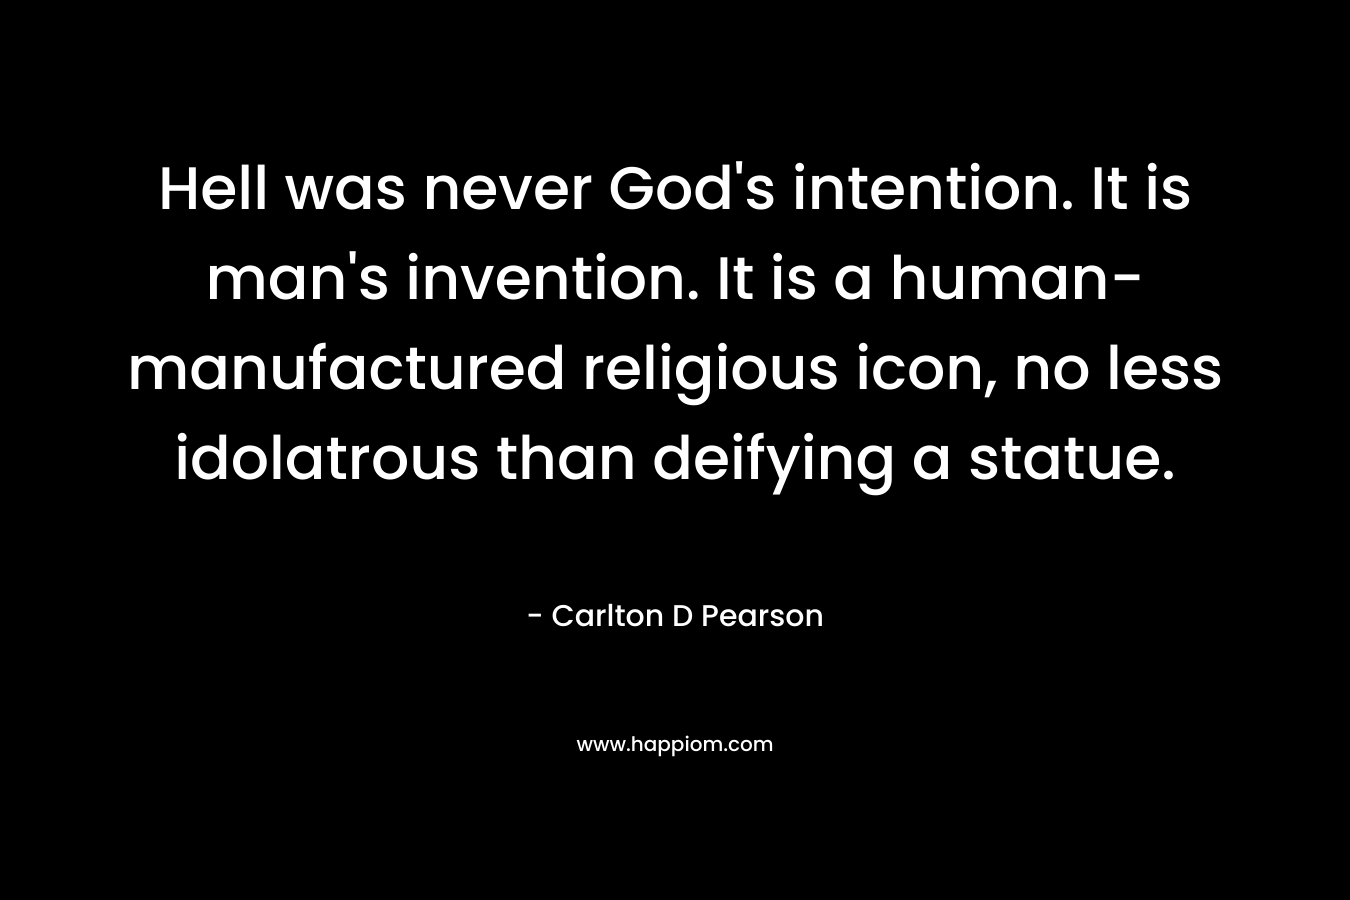 Hell was never God’s intention. It is man’s invention. It is a human-manufactured religious icon, no less idolatrous than deifying a statue. – Carlton D Pearson